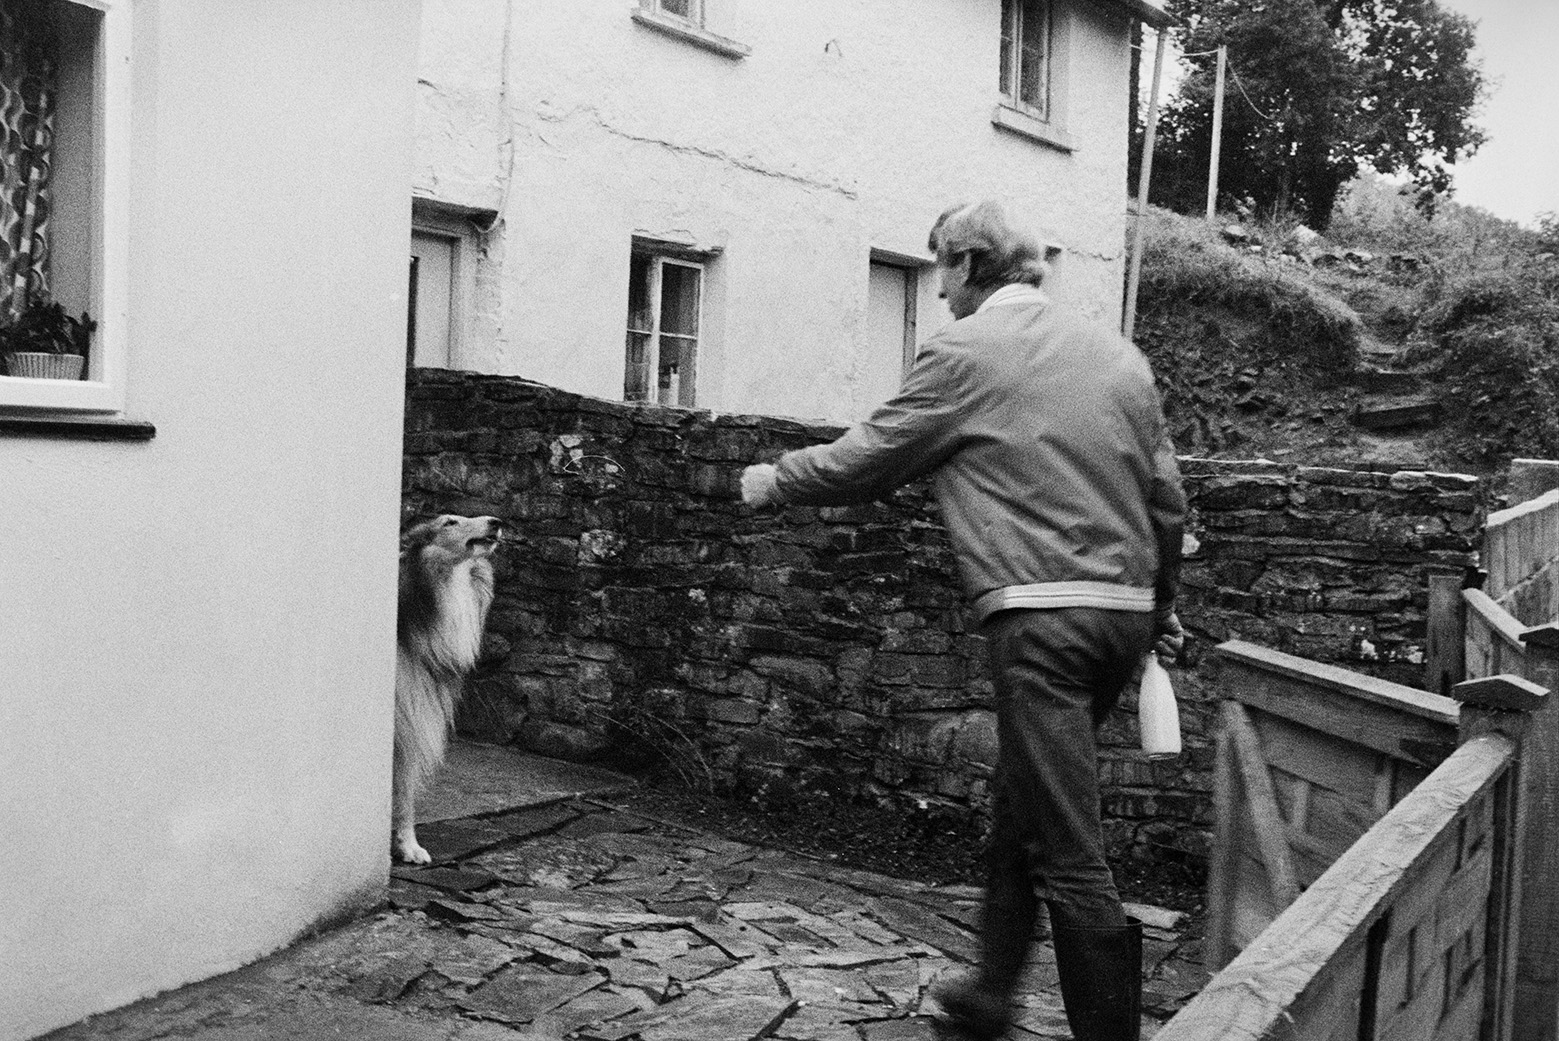 Ivor Bourne delivering a milk bottle to a house in Beaford. He is petting a dog in the front yard of the house.